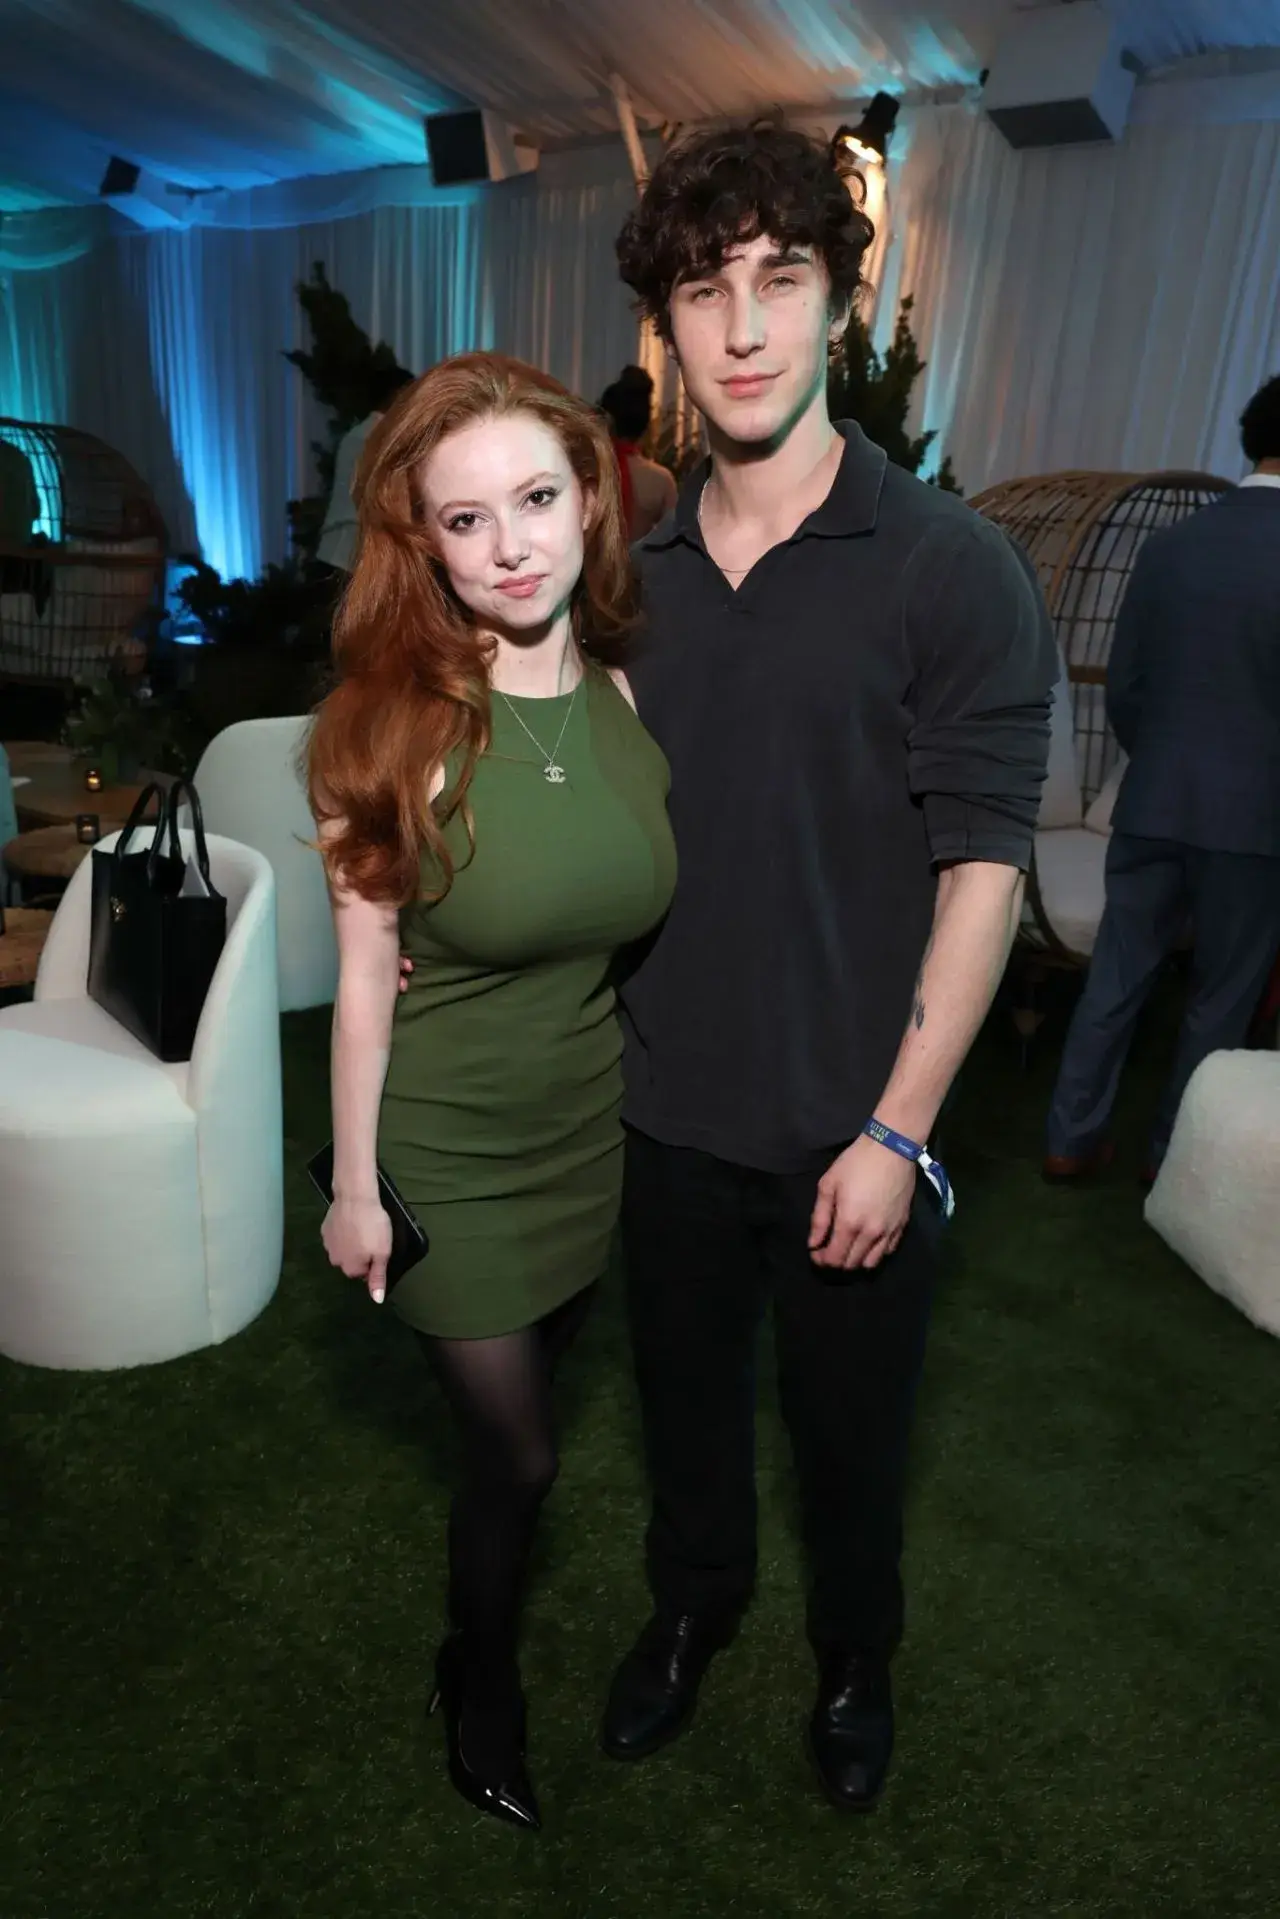 FRANCESCA CAPALDI AT LITTLE WING SCREENING EVENT AND RED CARPET 2